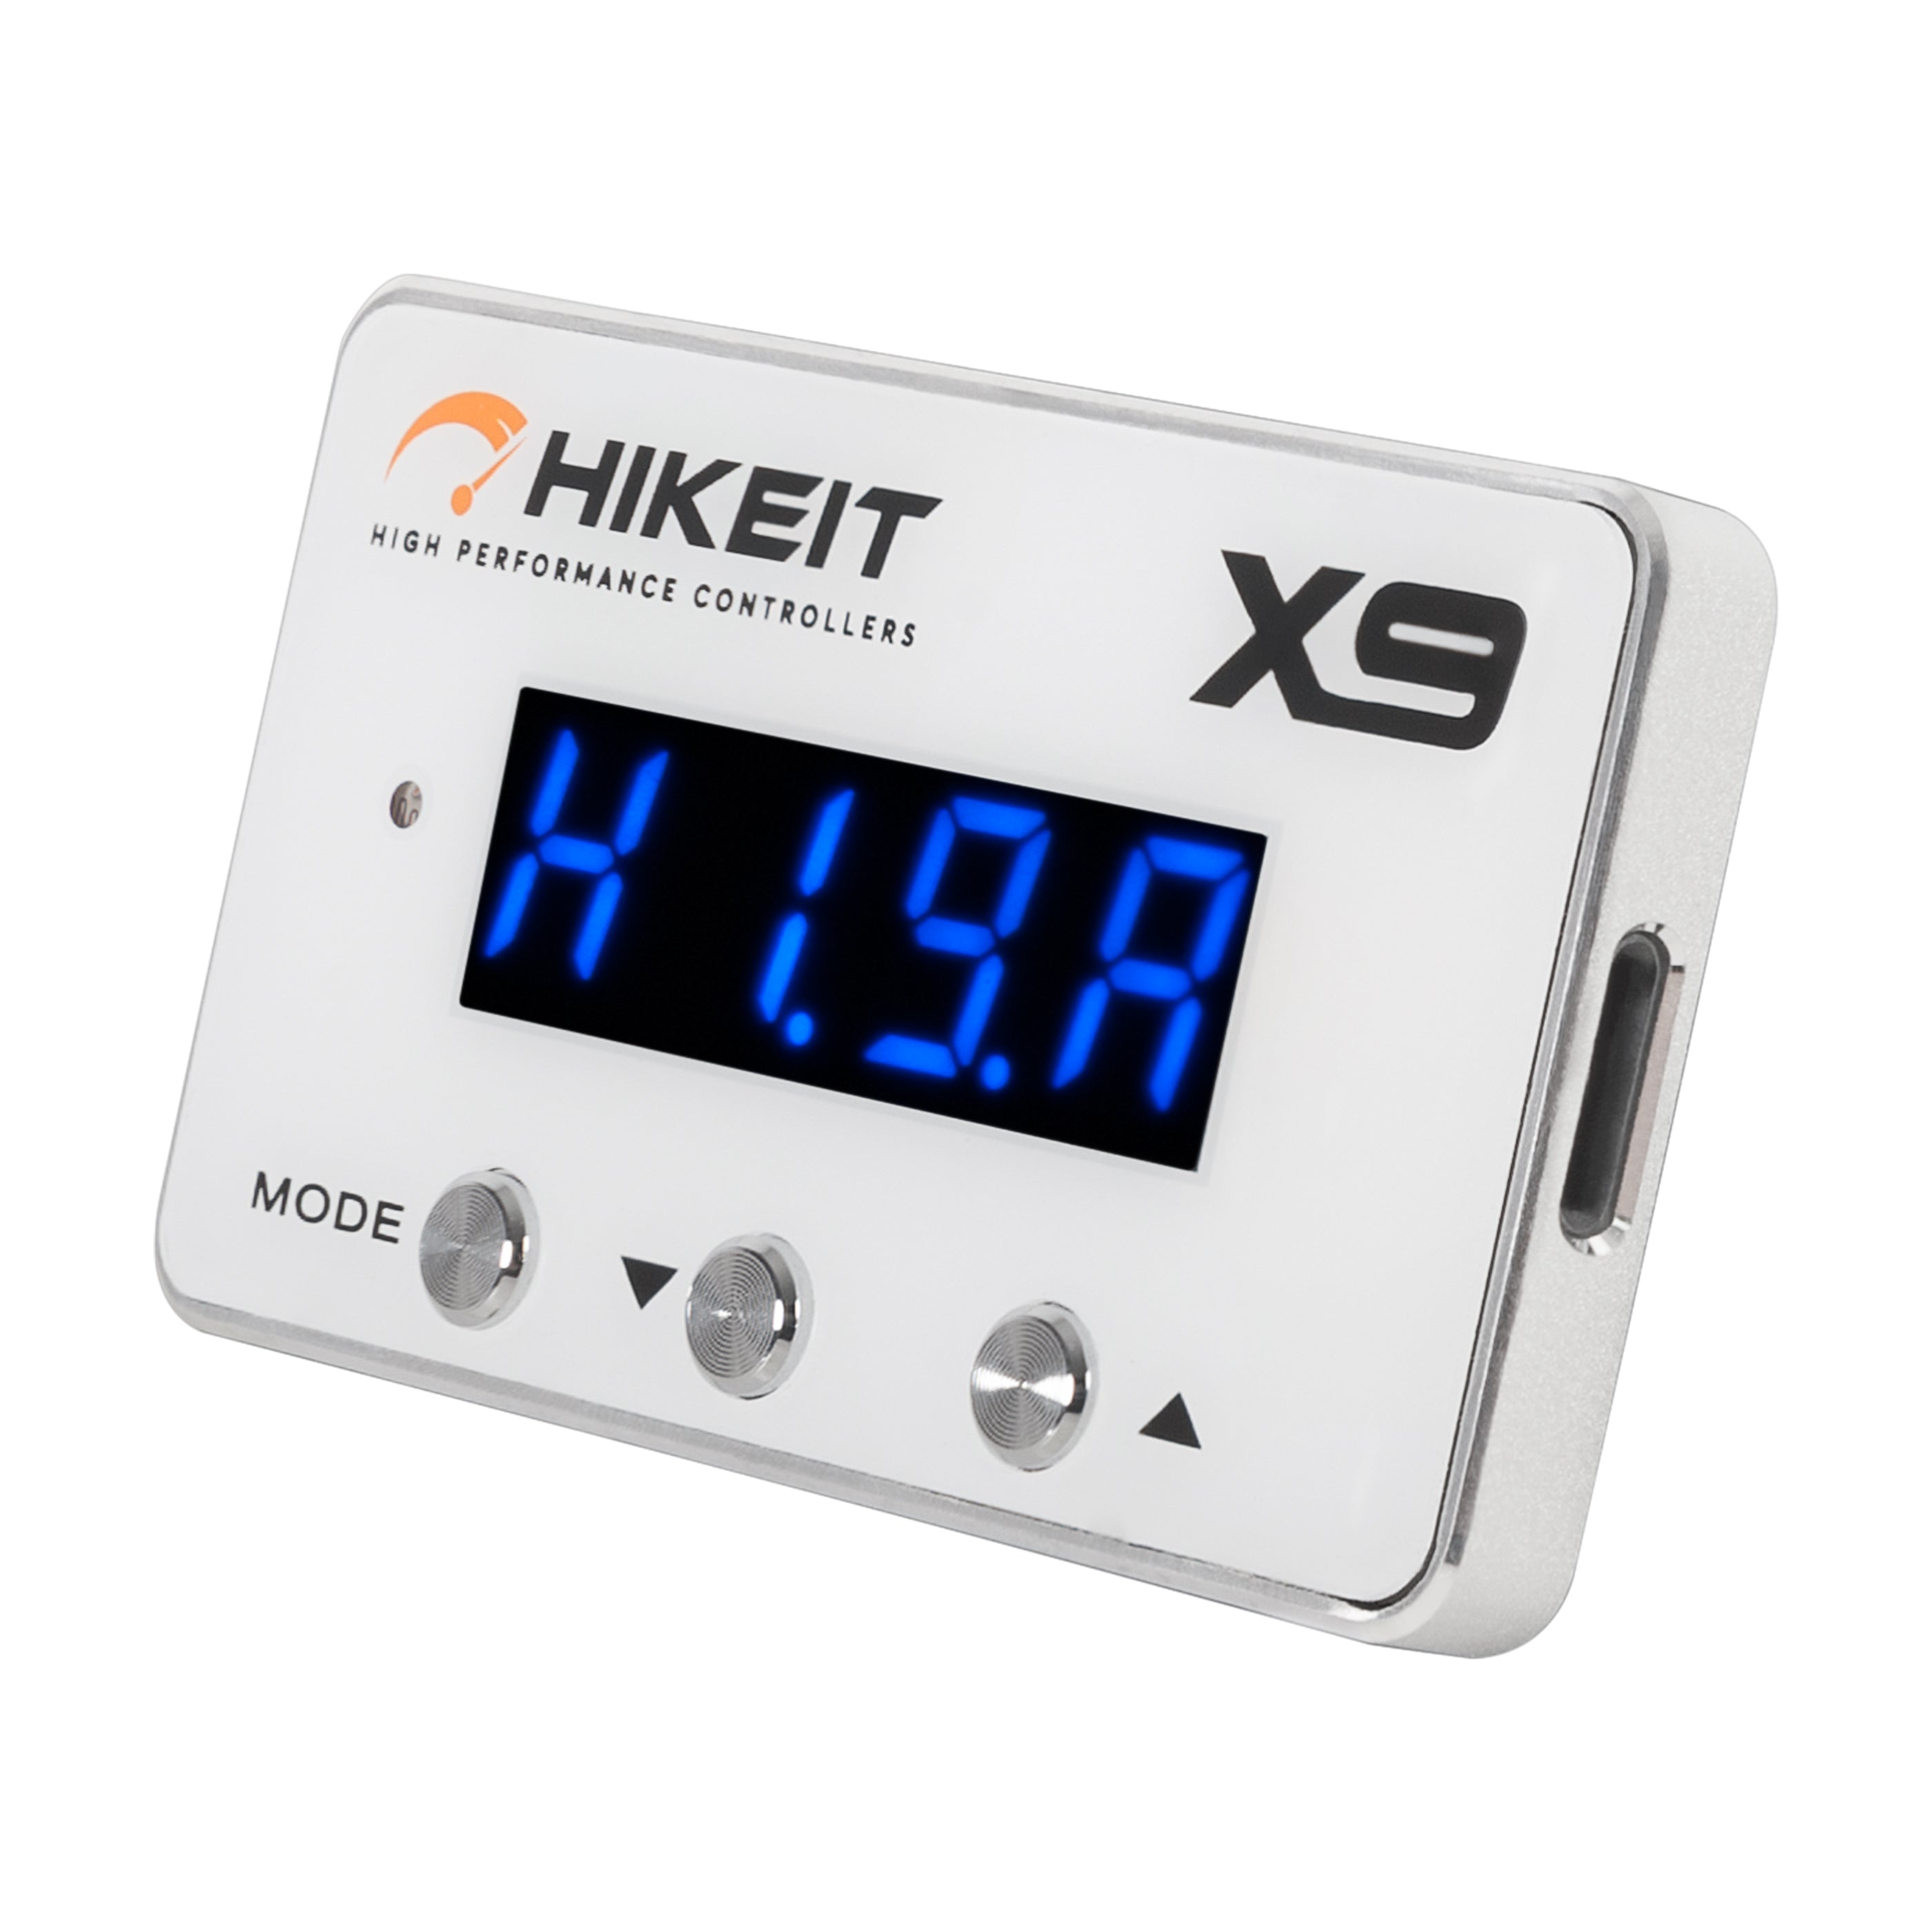 HIKEIT THROTTLE CONTROLLER FOR CITROEN - REEL 'N' DEAL TACKLE